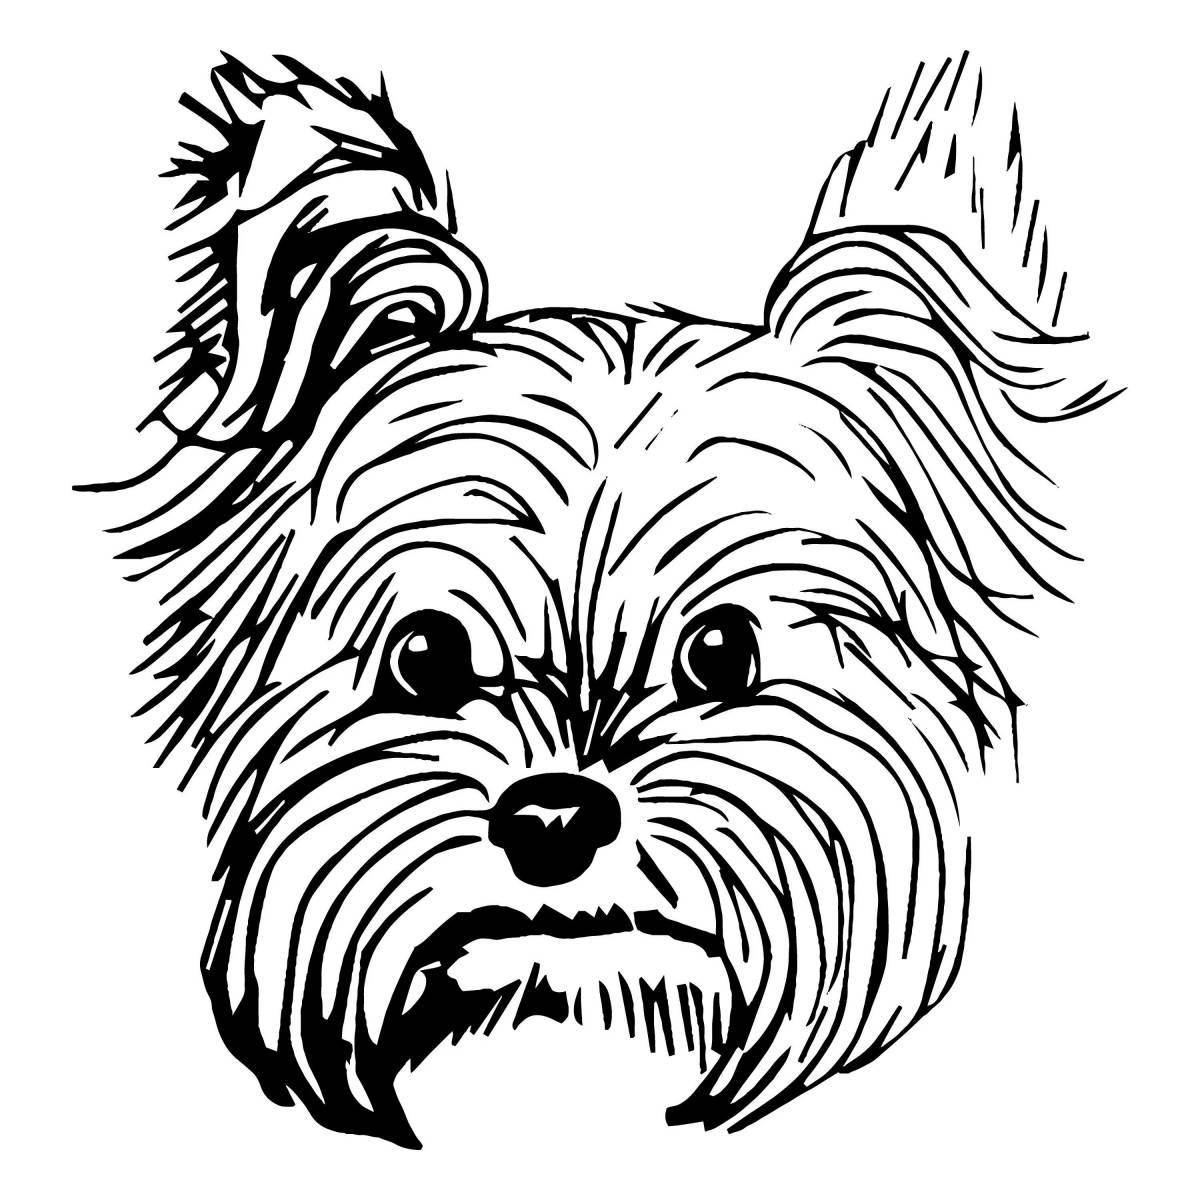 Colouring funny yorkshire terrier